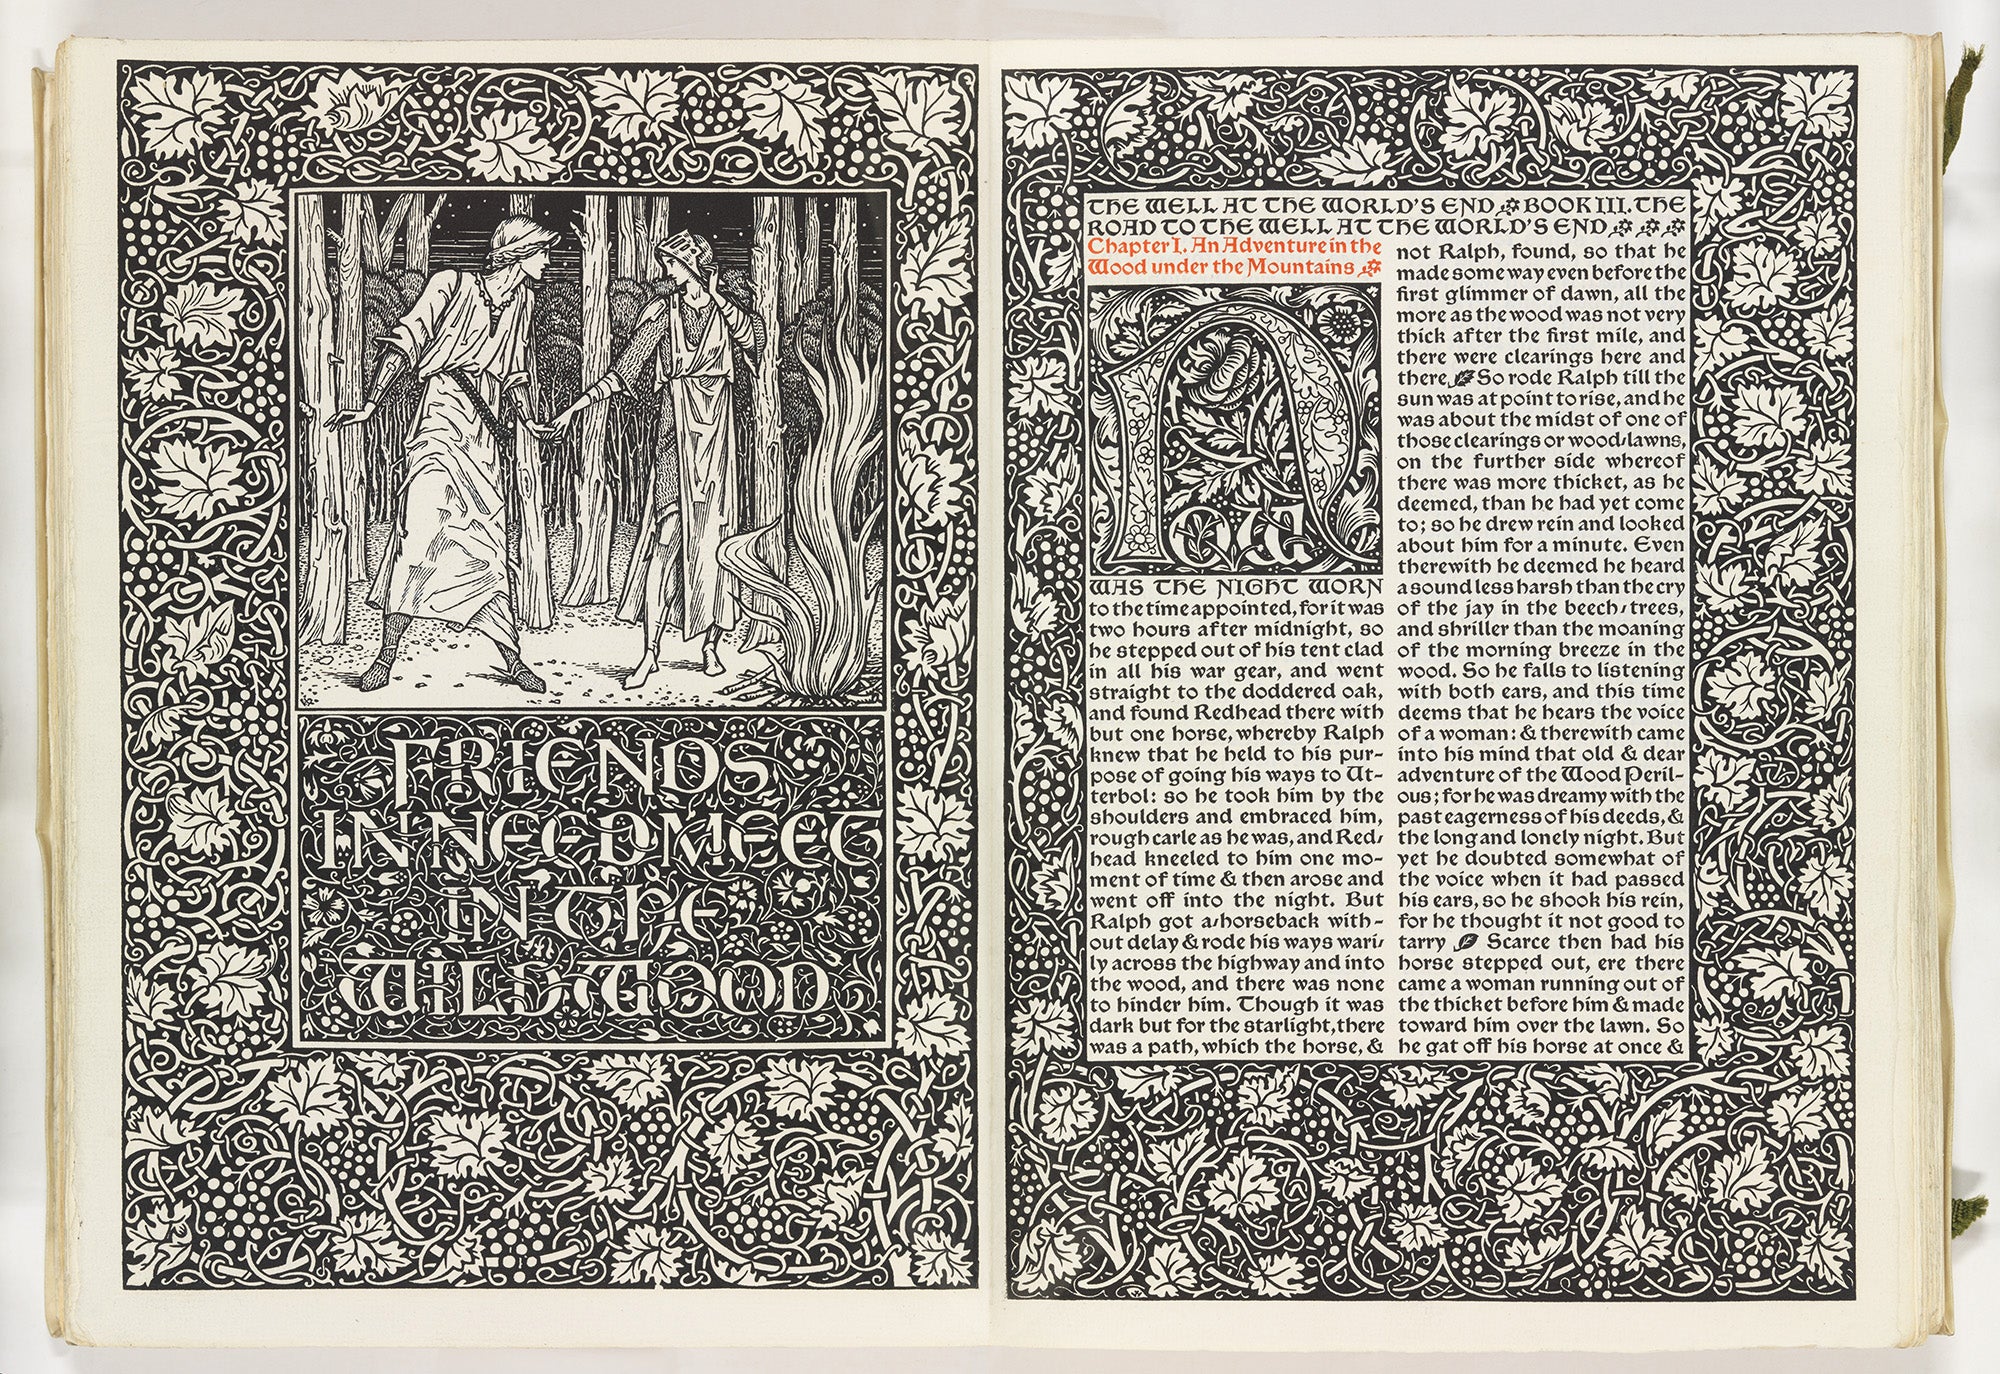 From The Well at the World's End, Kelmscott Press, 1896